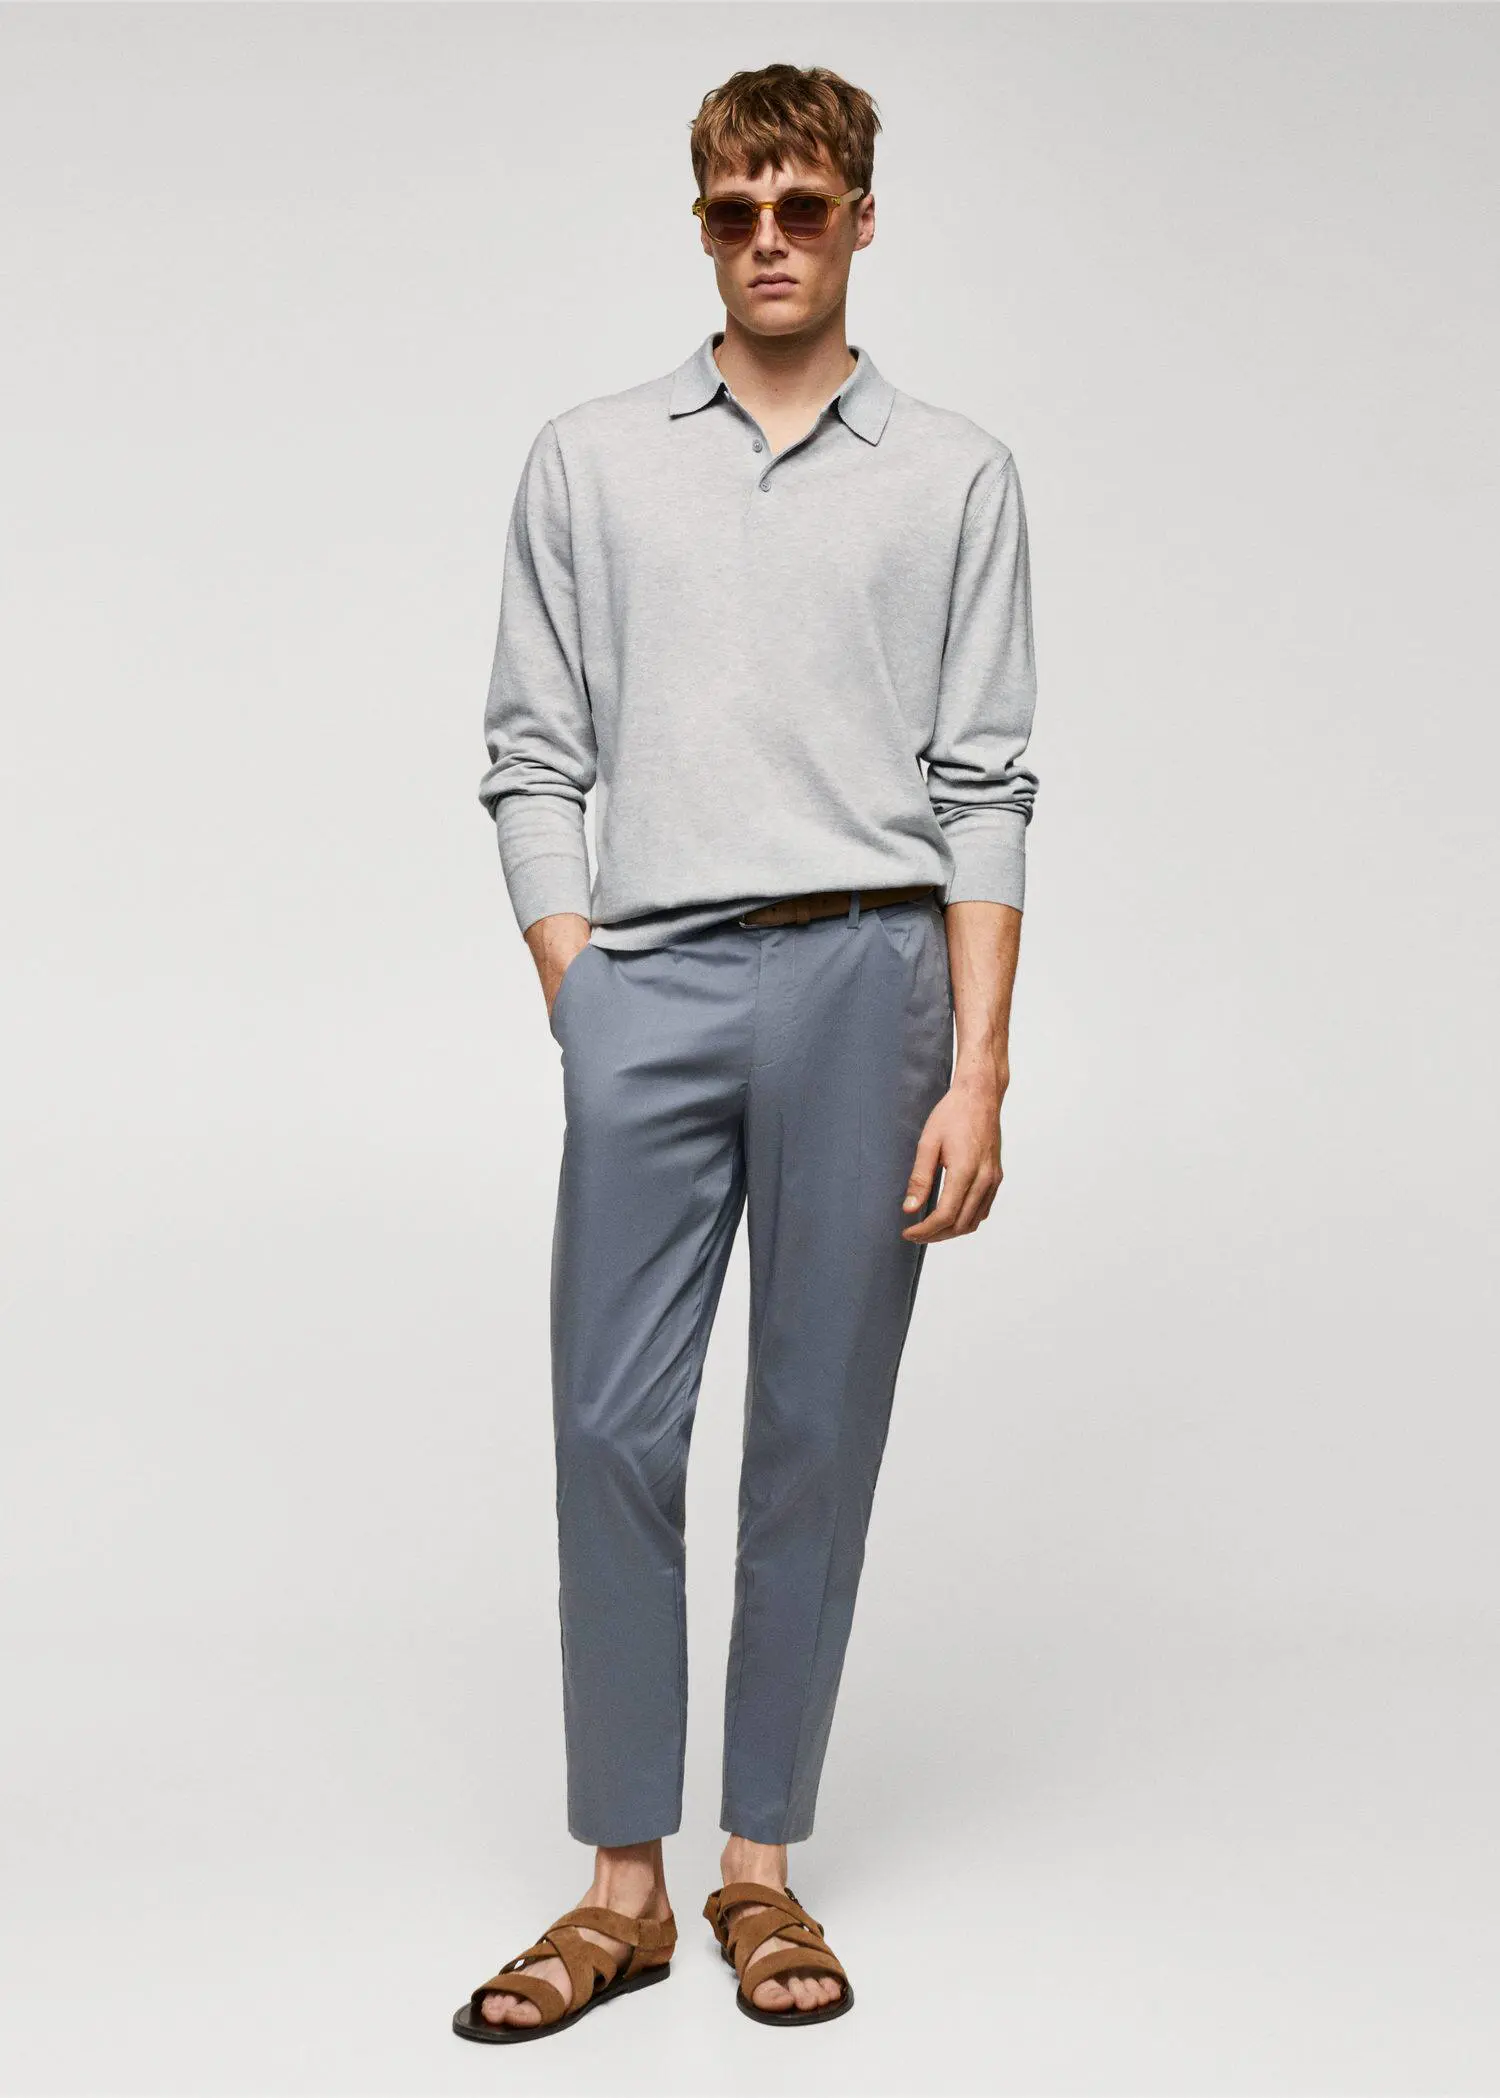 Mango Long-sleeved cotton jersey polo shirt. a man in a gray shirt and blue pants. 